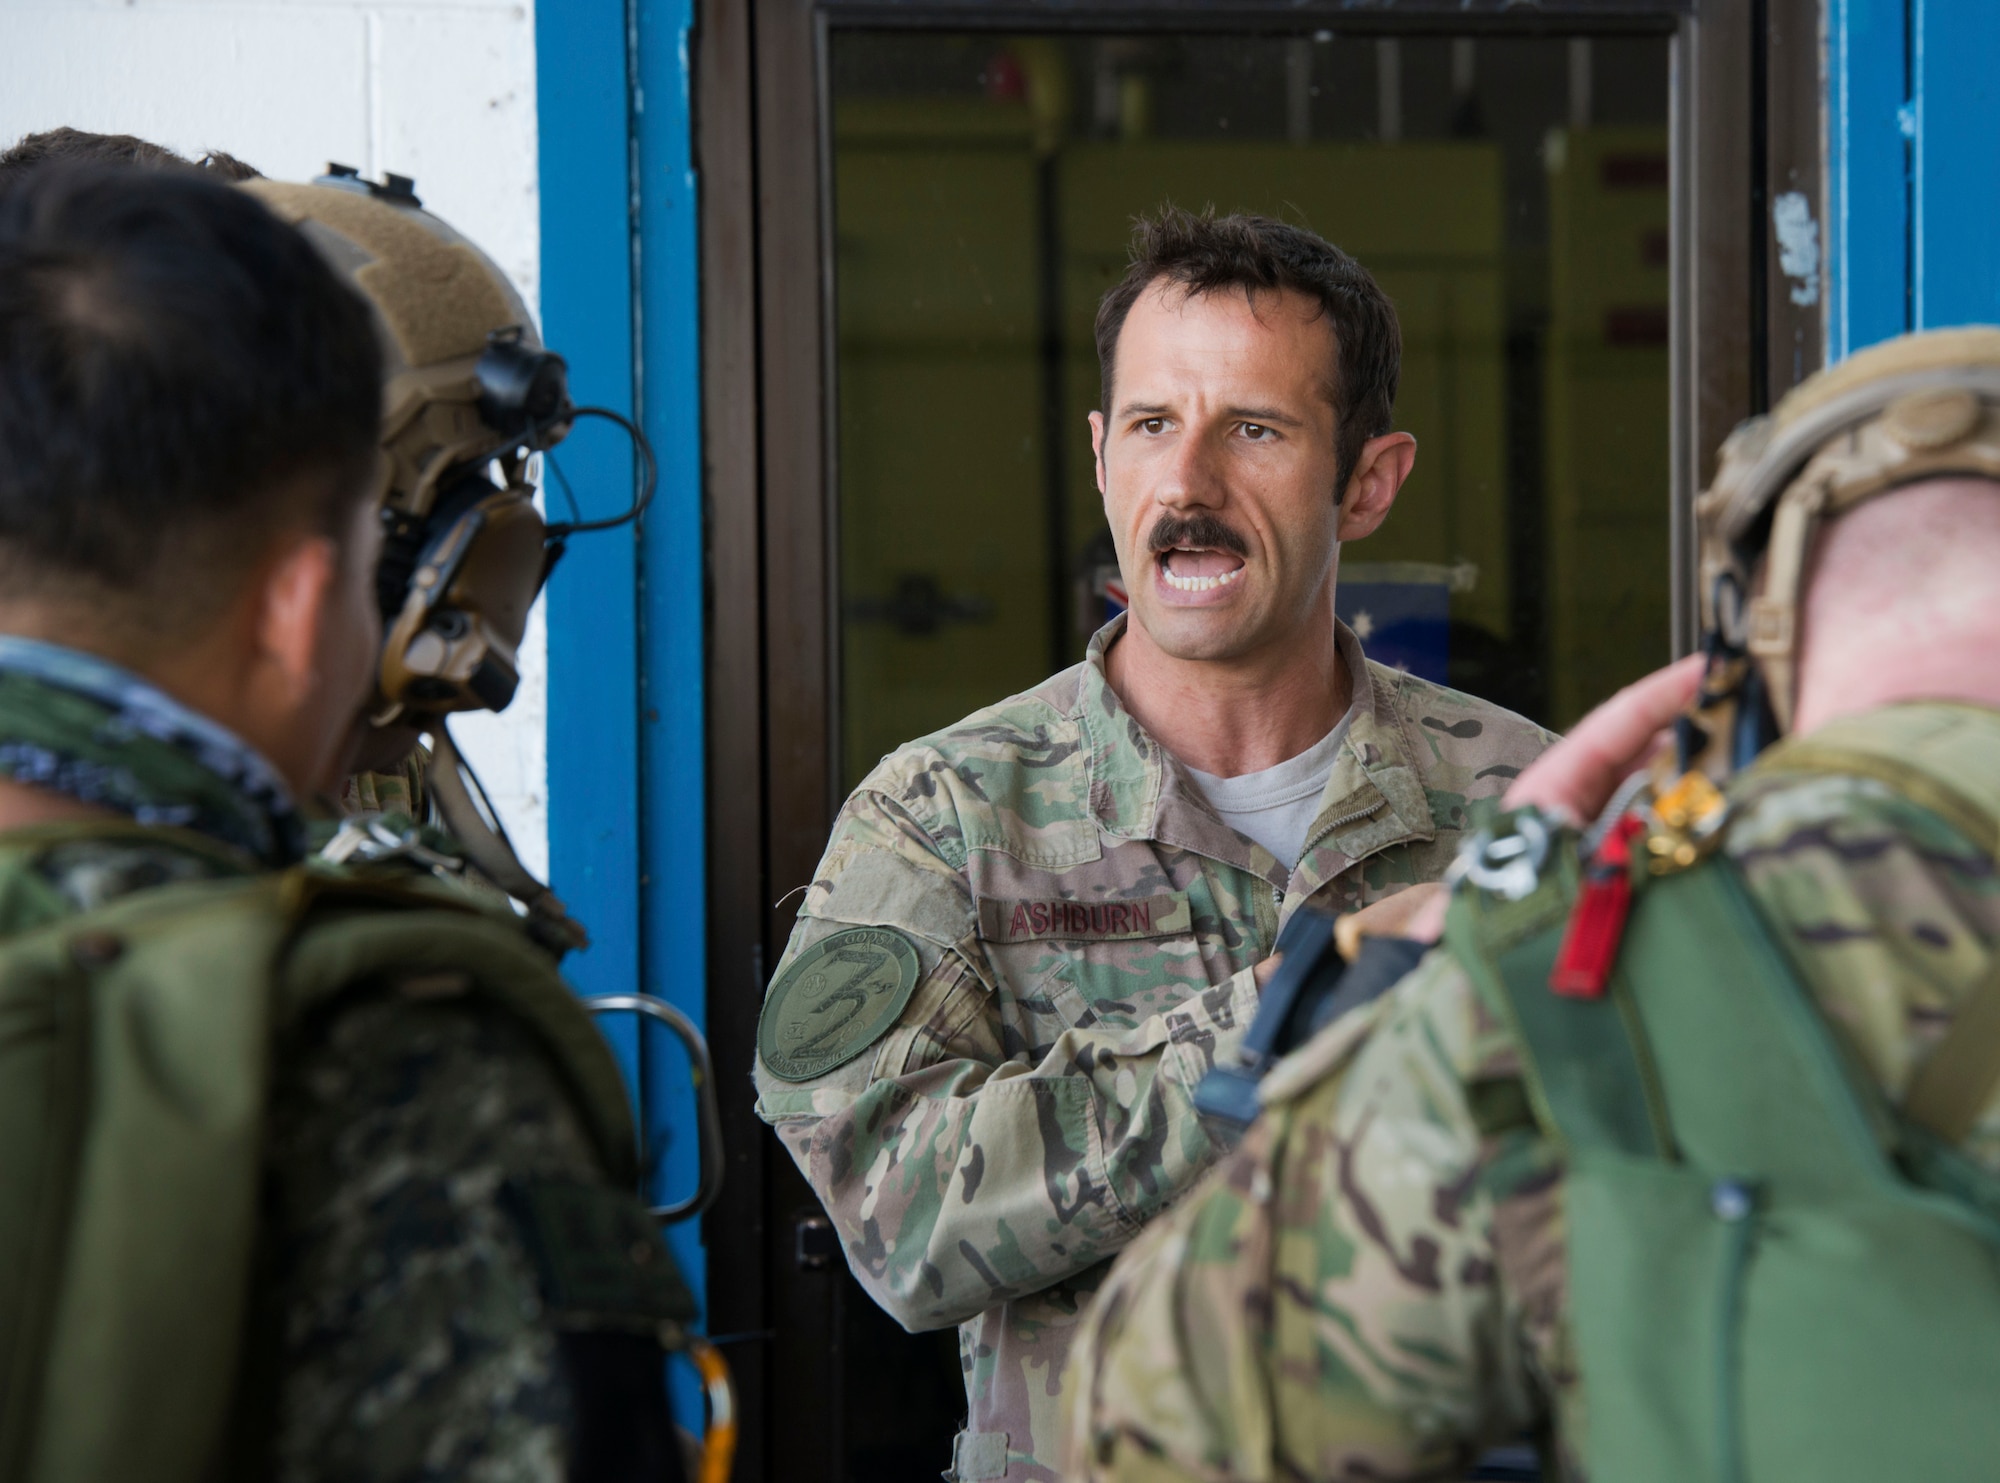 Capt. Timothy Ashburn, 1st Special Operations Squadron aircraft commander, talks with jumpmasters from Operational Detachment Alpha (ODA) 1324 and Philippine Army Light Reaction Regiment (LRR) in preparation for high-altitude, low-opening (HALO) airdrops from a MC-130H Combat Talon II at Clark Air Base, Sept. 24. Though the HALO airdrop was not an official part of Teak Piston 2016, the presence of a MC-130H in the Philippines allowed for a unique training engagement. (U.S. Air Force photo by Capt. Jessica Tait)